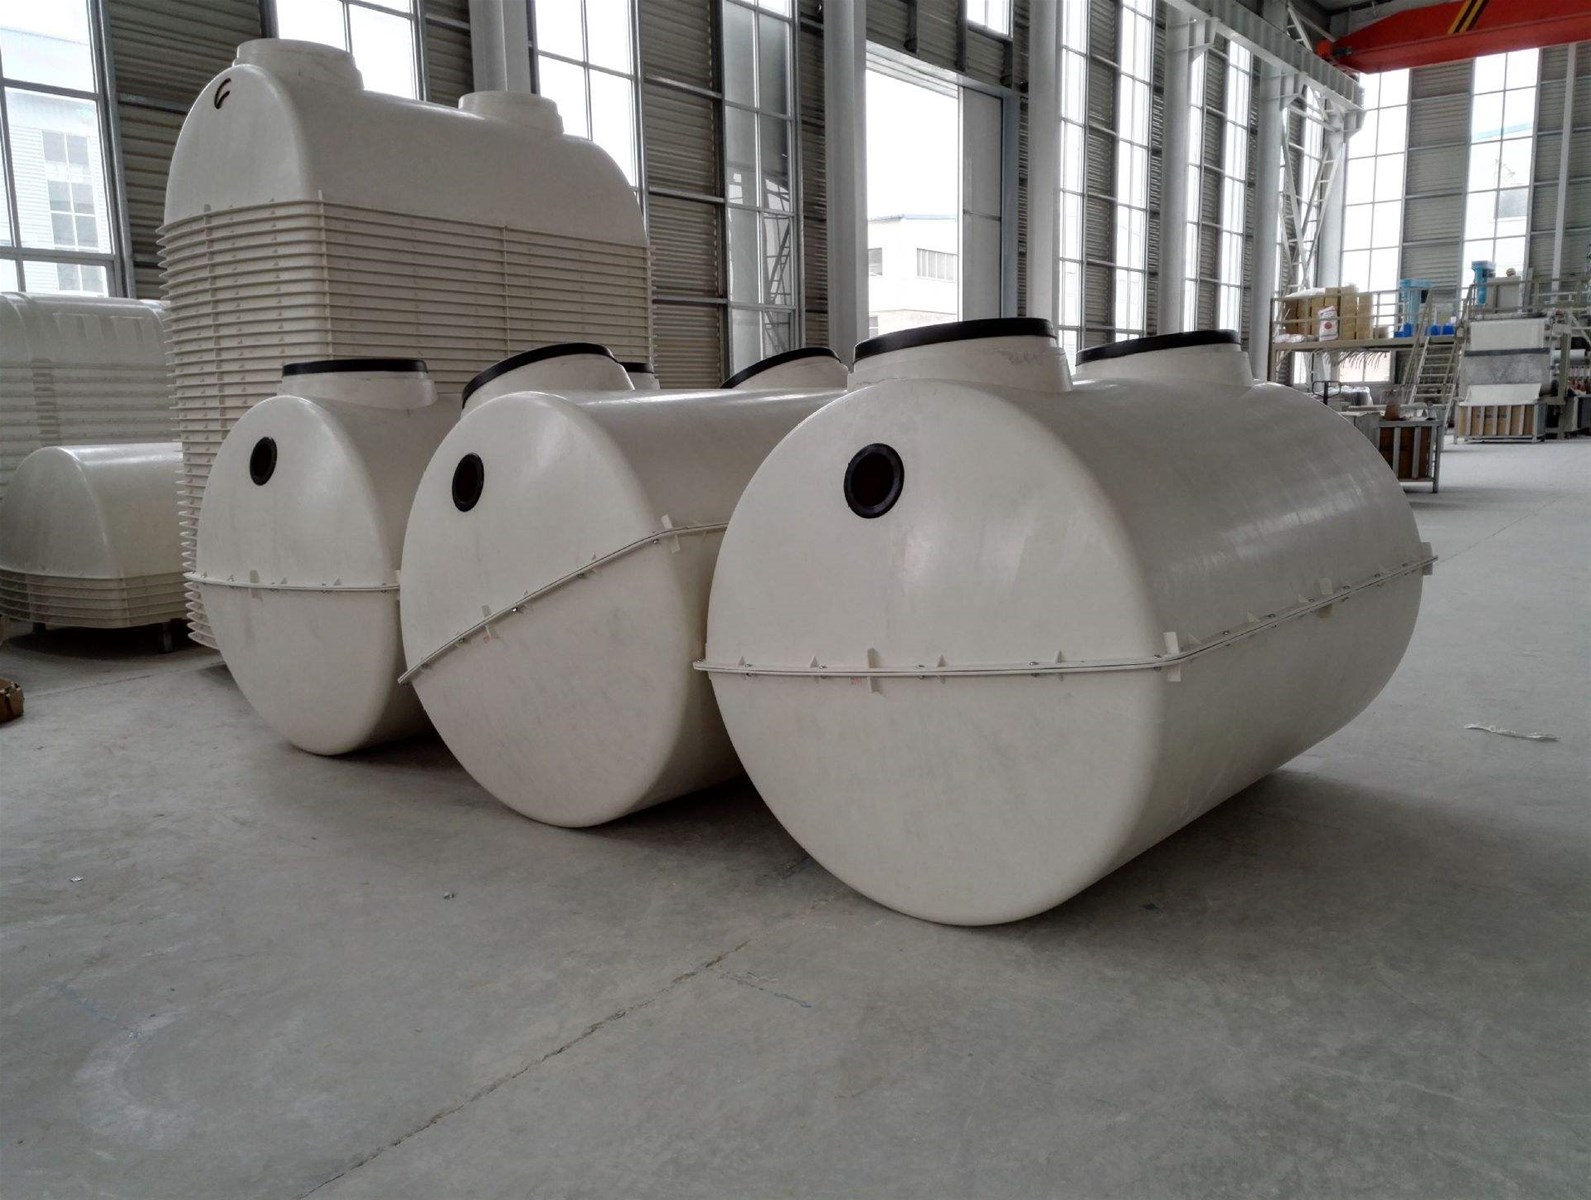 FRP Septic Tank for Sewage Treatment